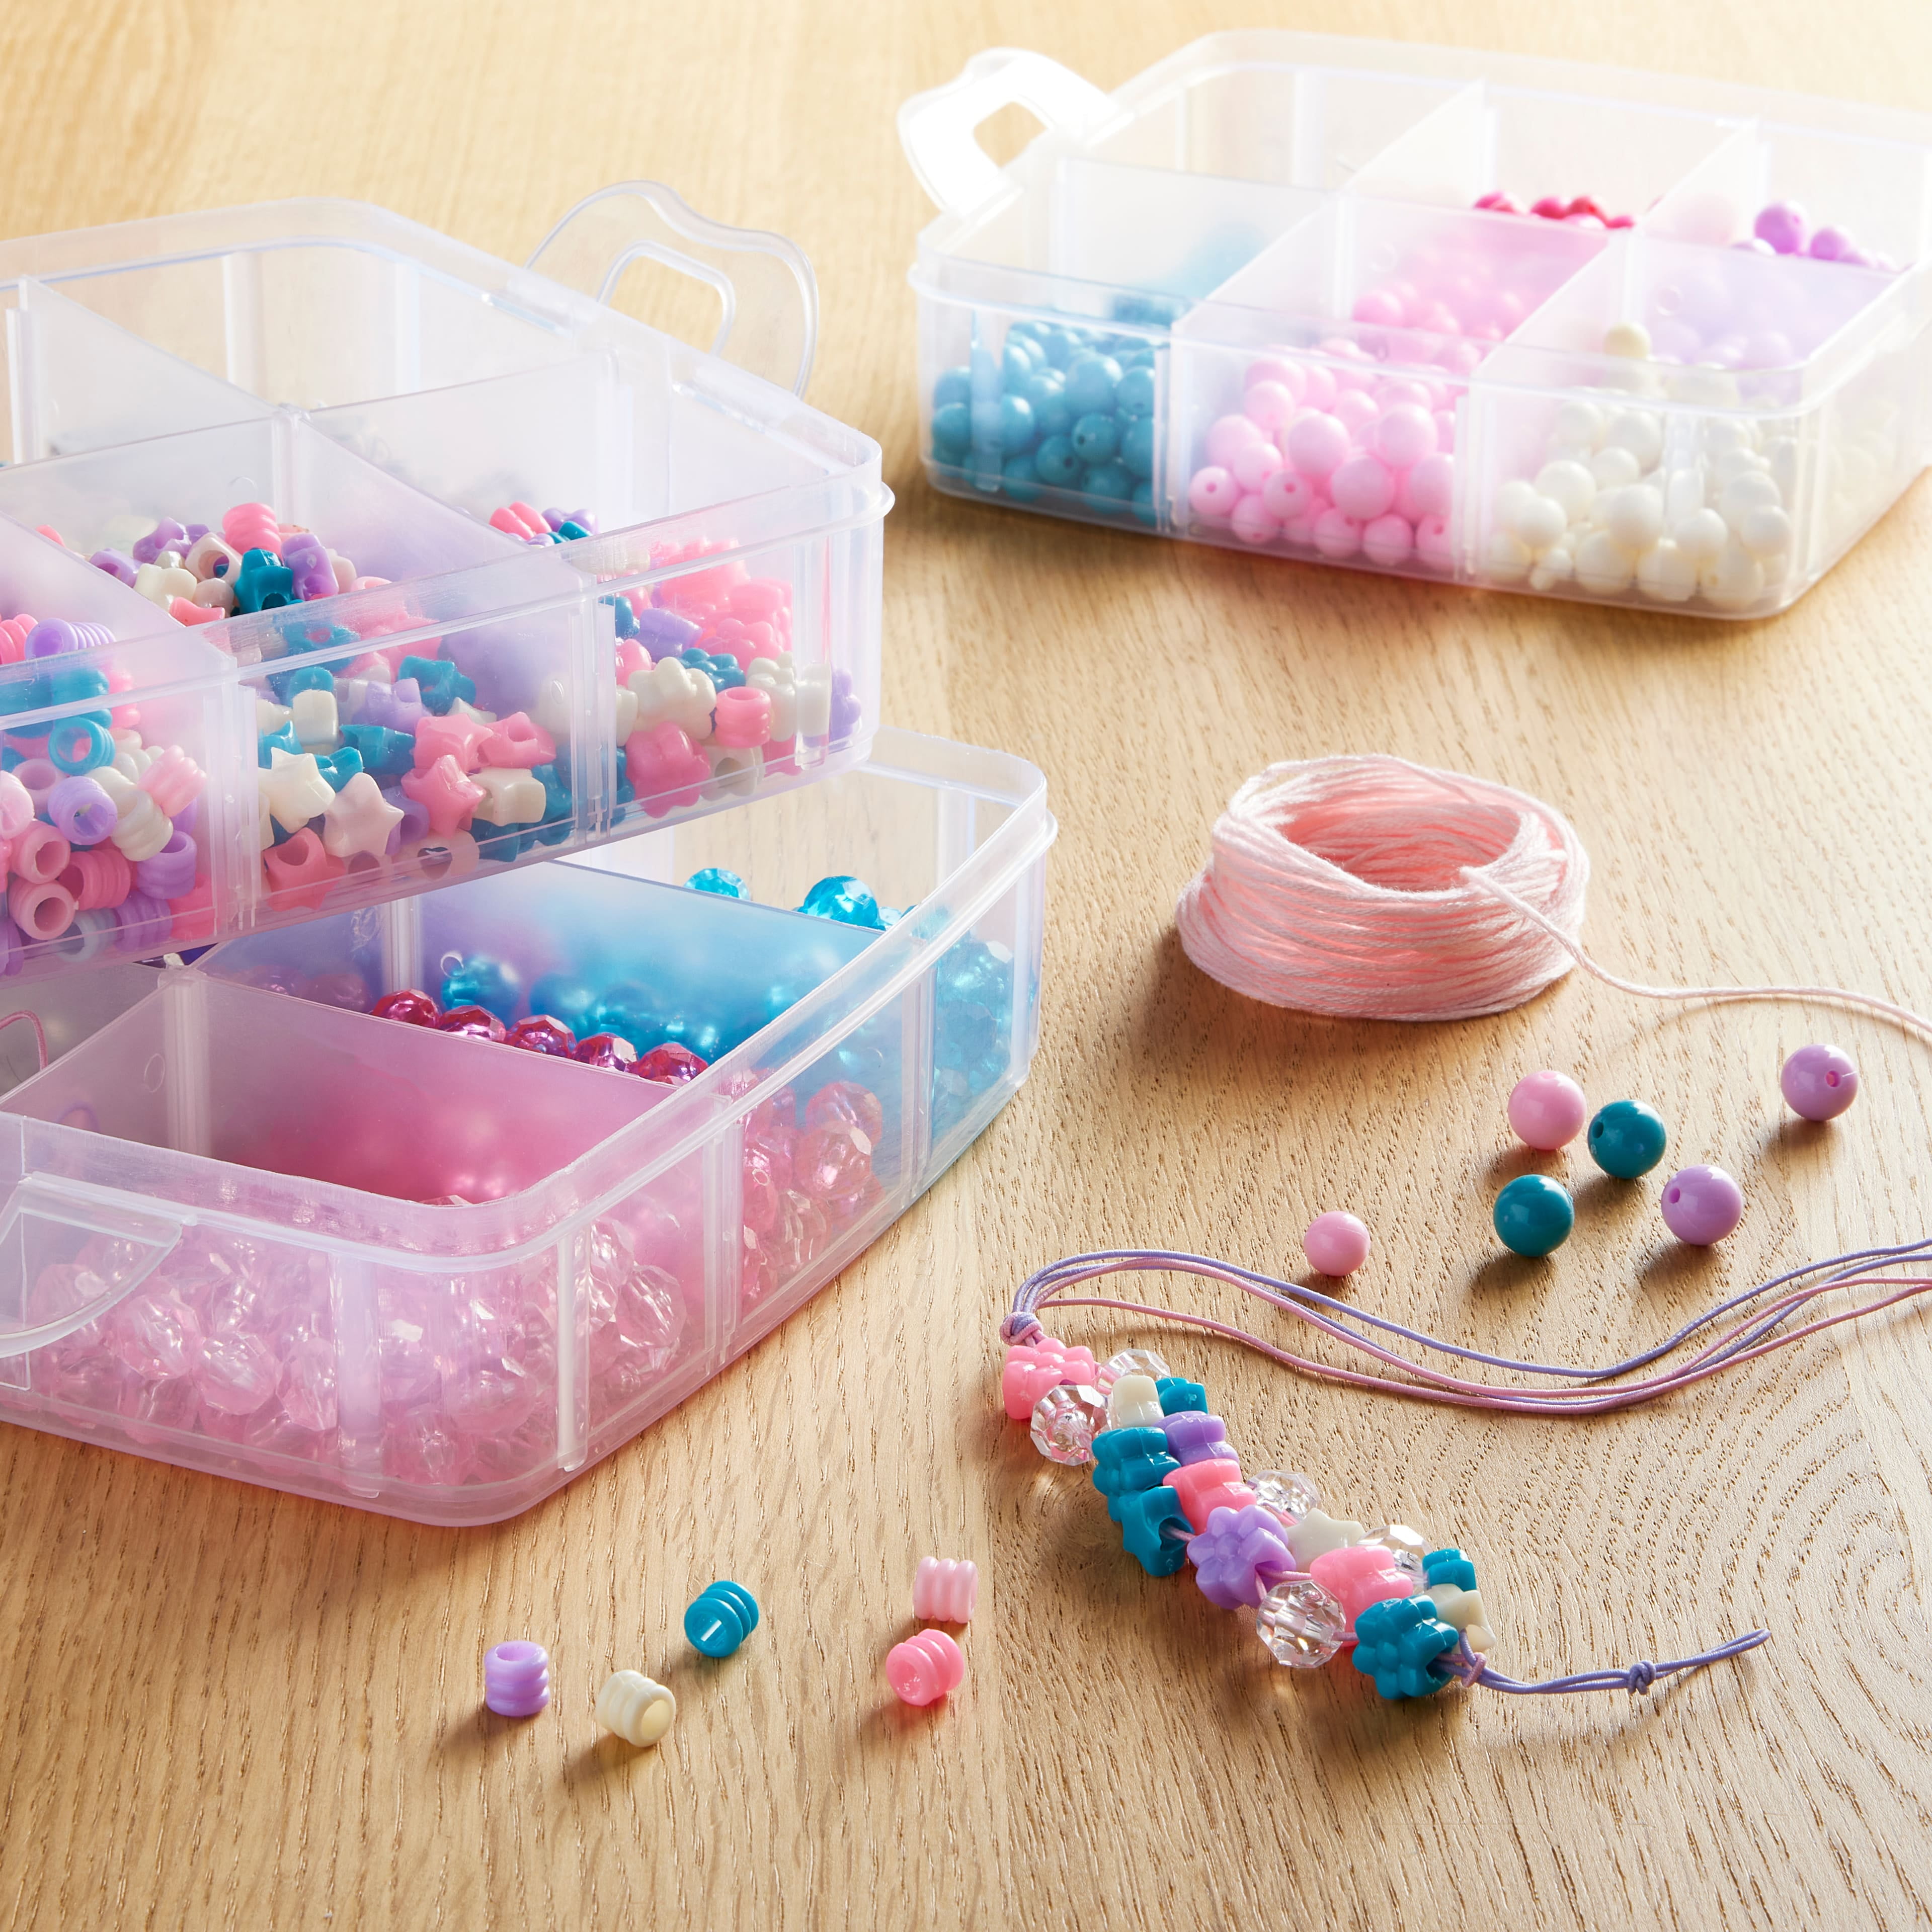 DIY Silicone Bead Kit pastel Serenity Make Your Own Jewellery 9 Mm Beads  Craft Kids & Adults Supports Mental Health 